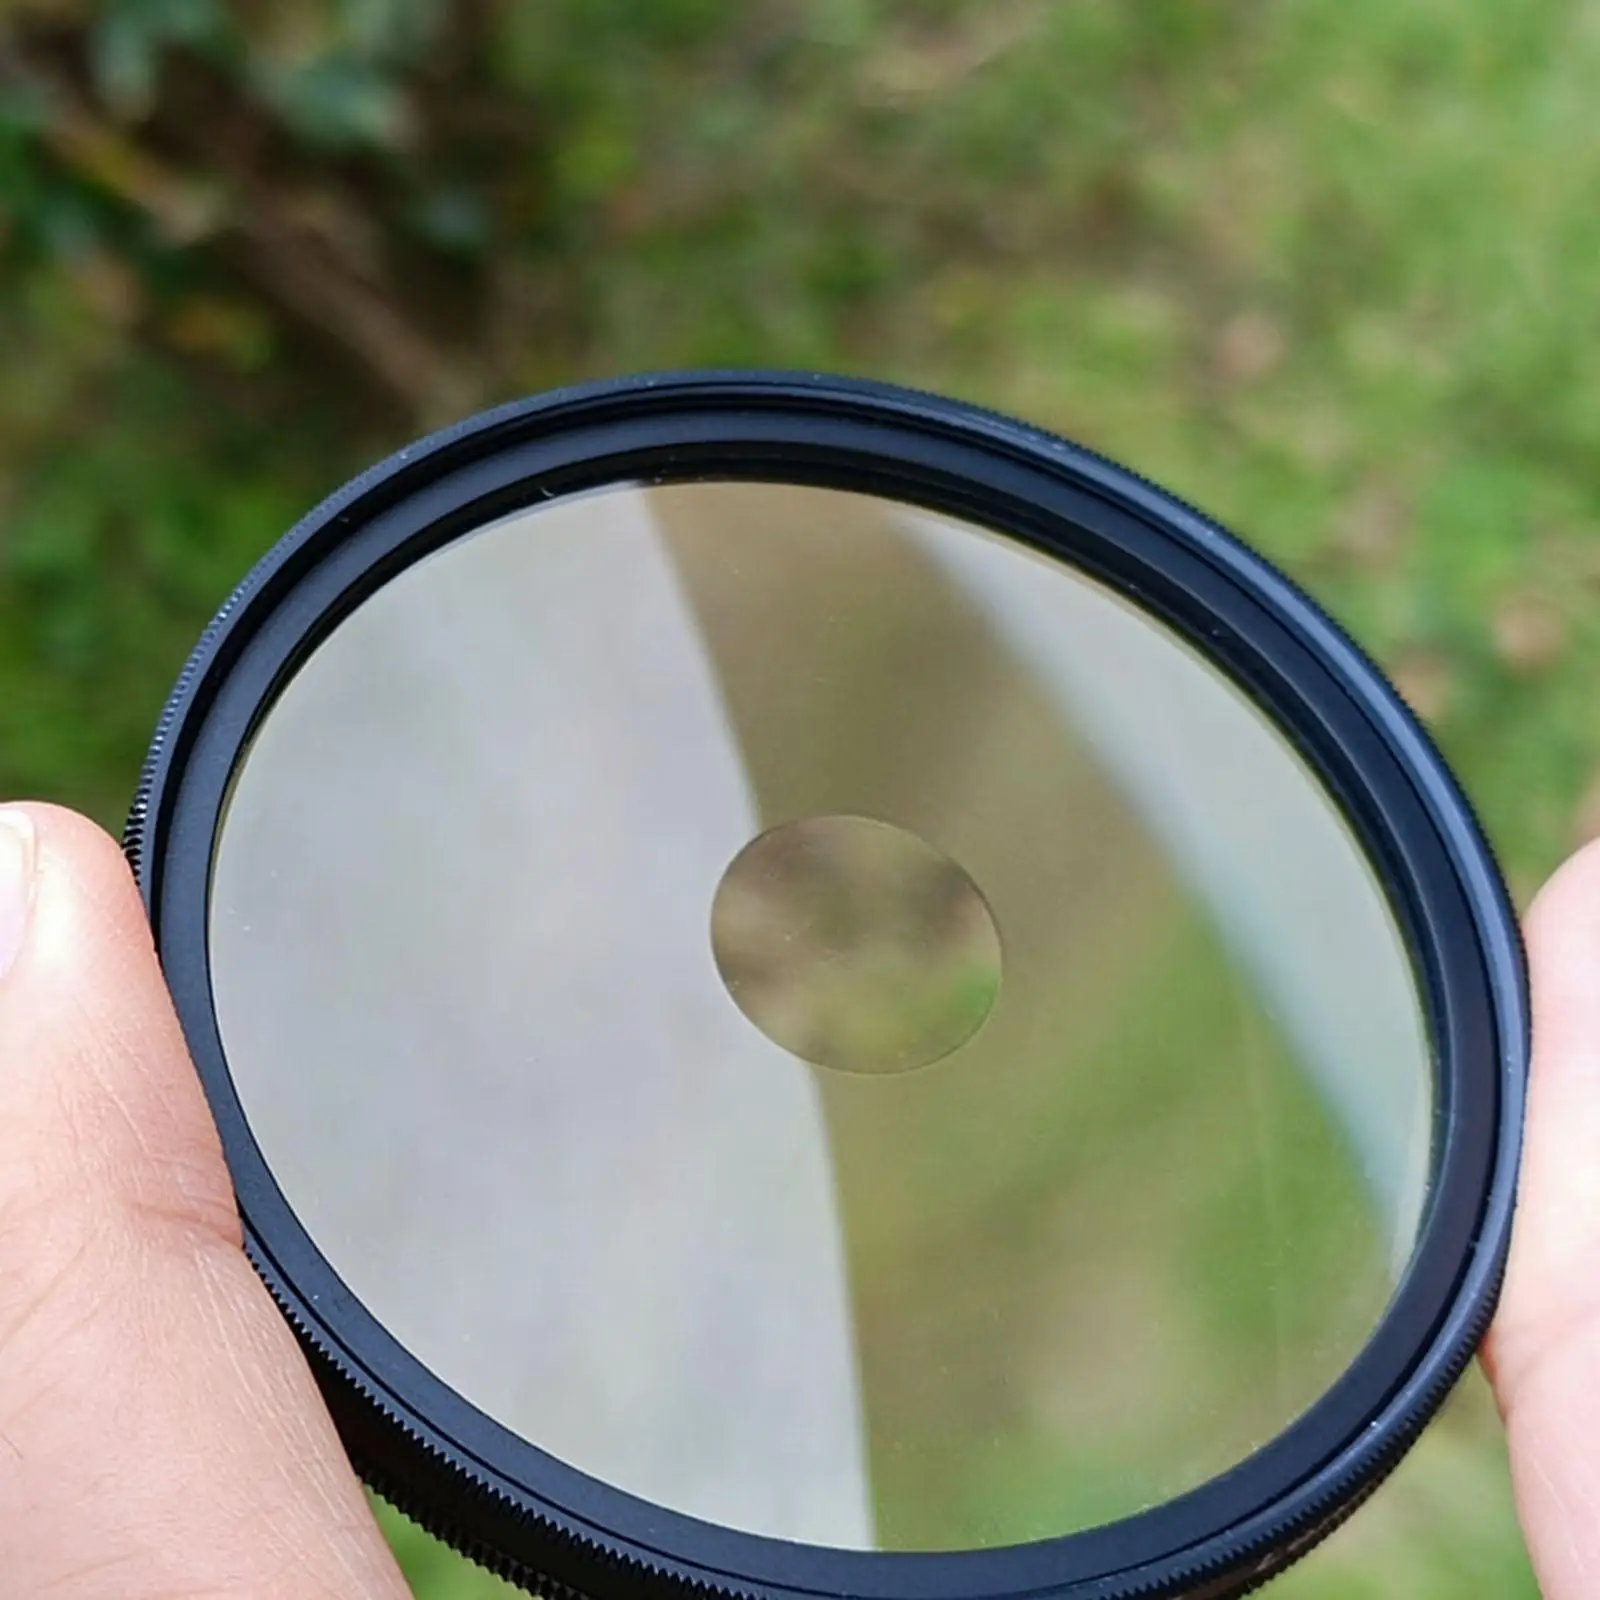 Camera Effect Filter for Photography Accessories, Lightweight Portable Glass Lens, Camera Glass 7mm